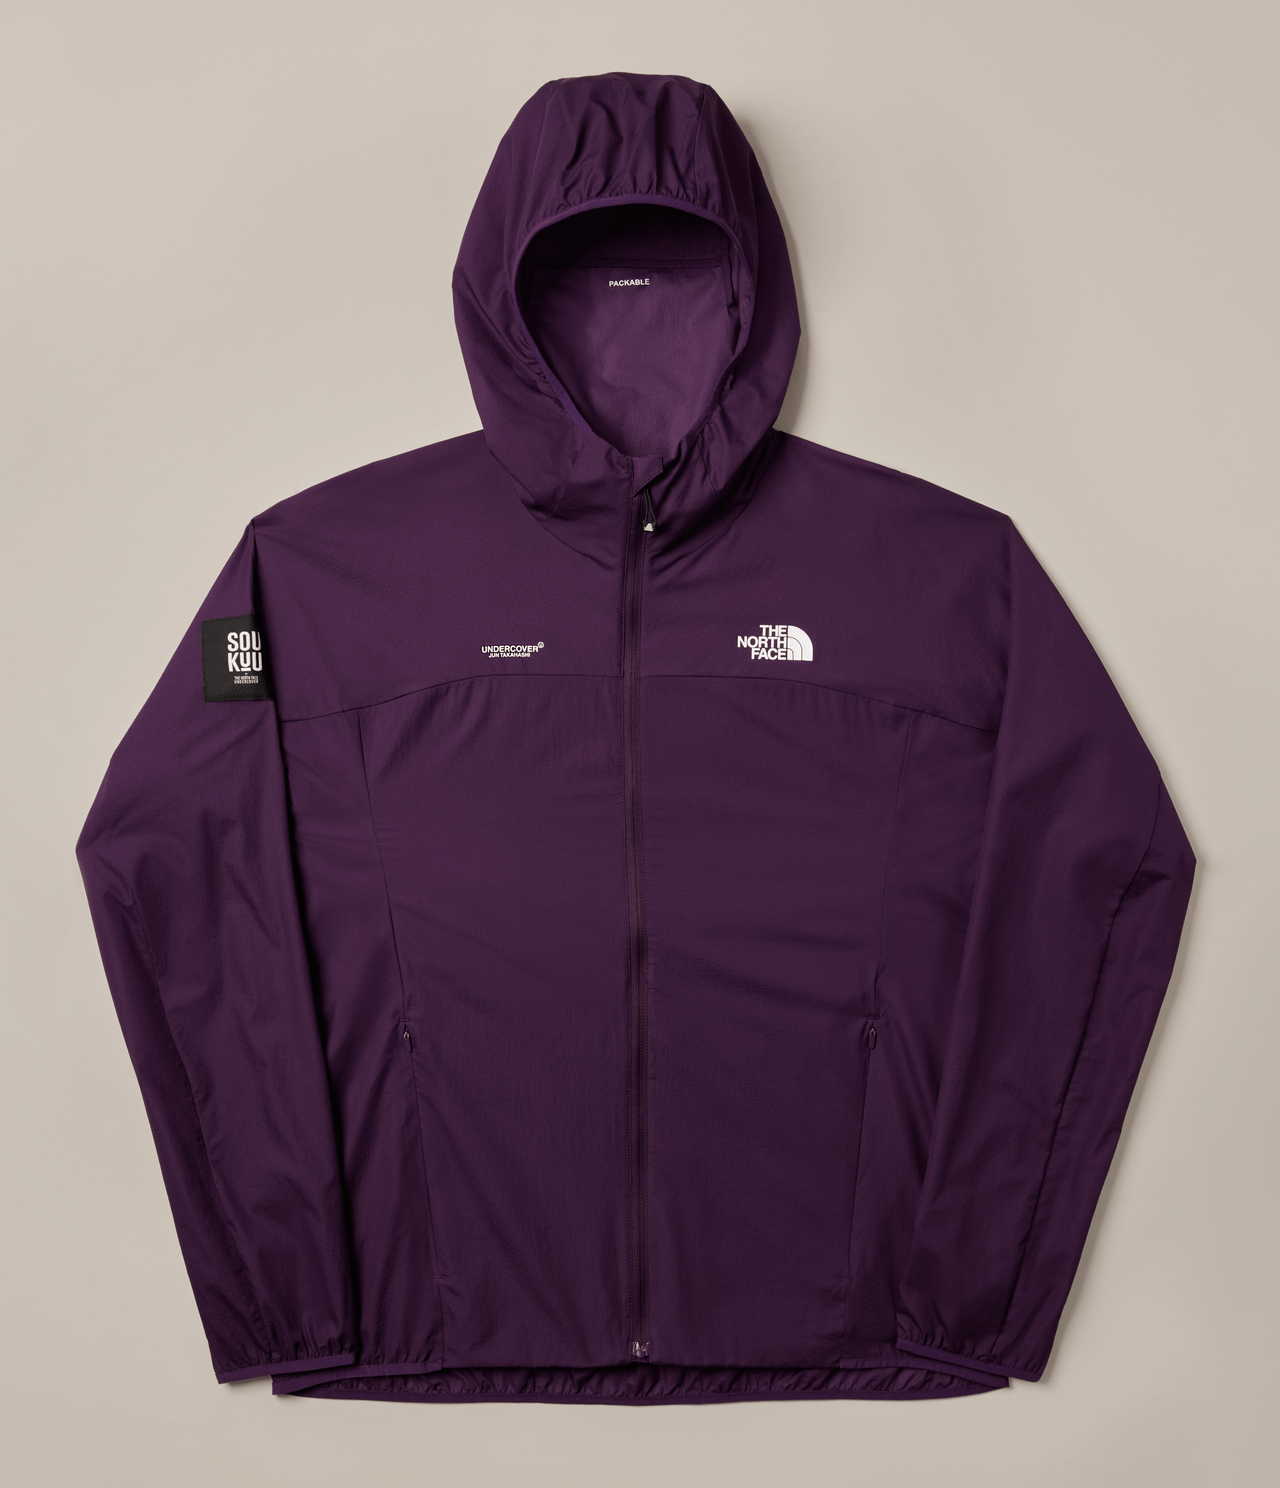 THE NORTH FACE ザ・ノース・フェイス UNDERCOVER アンダーカバー コラボTHE NORTH FACE × UNDERCOVER Trail Run Packable Wind Jacket (ザ・ノース・フェイス x アンダーカバー トレイルラン・パッカブル・ウインドジャケット)　パープル